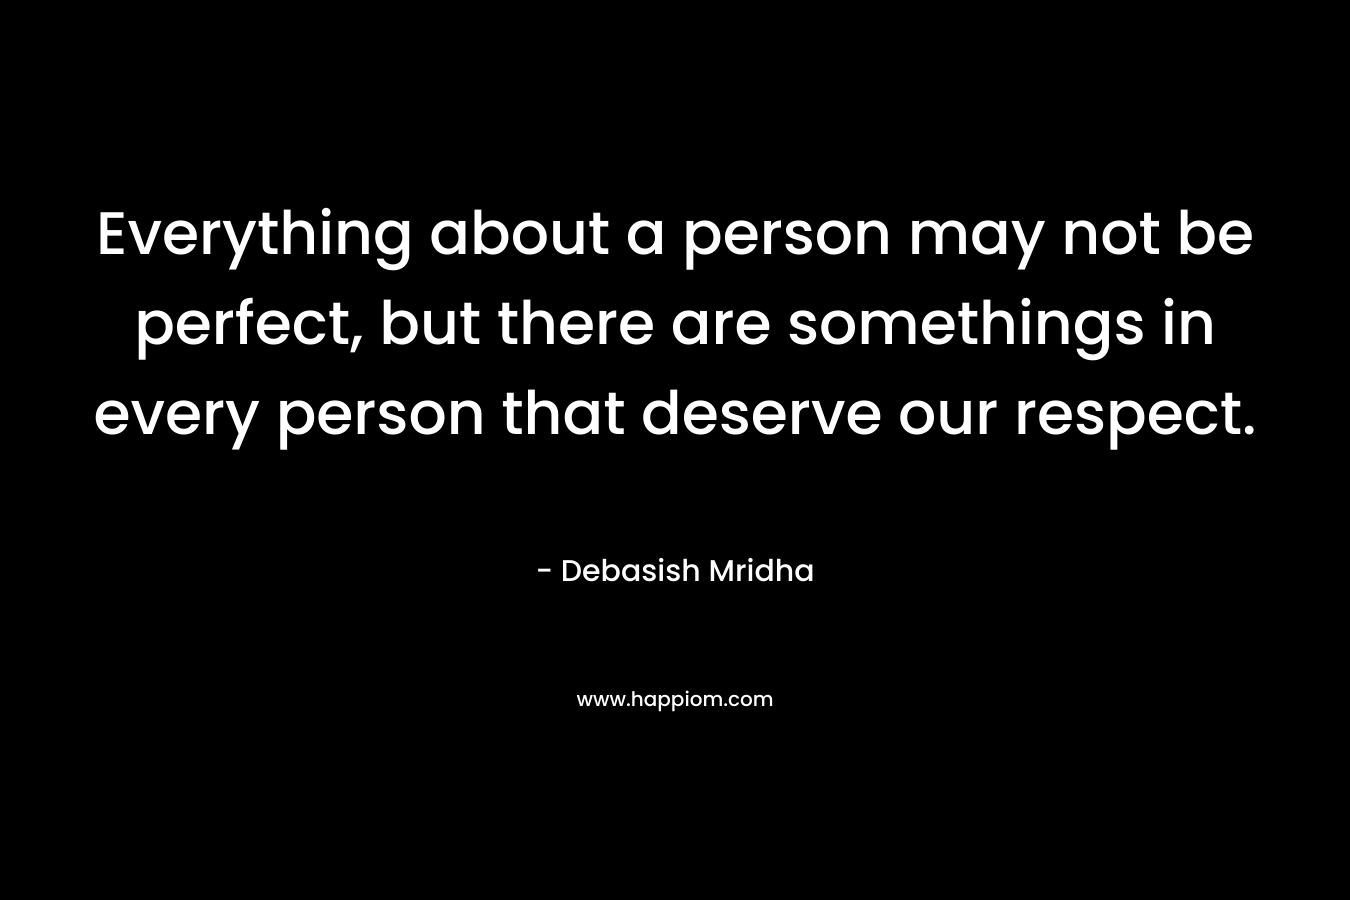 Everything about a person may not be perfect, but there are somethings in every person that deserve our respect. – Debasish Mridha